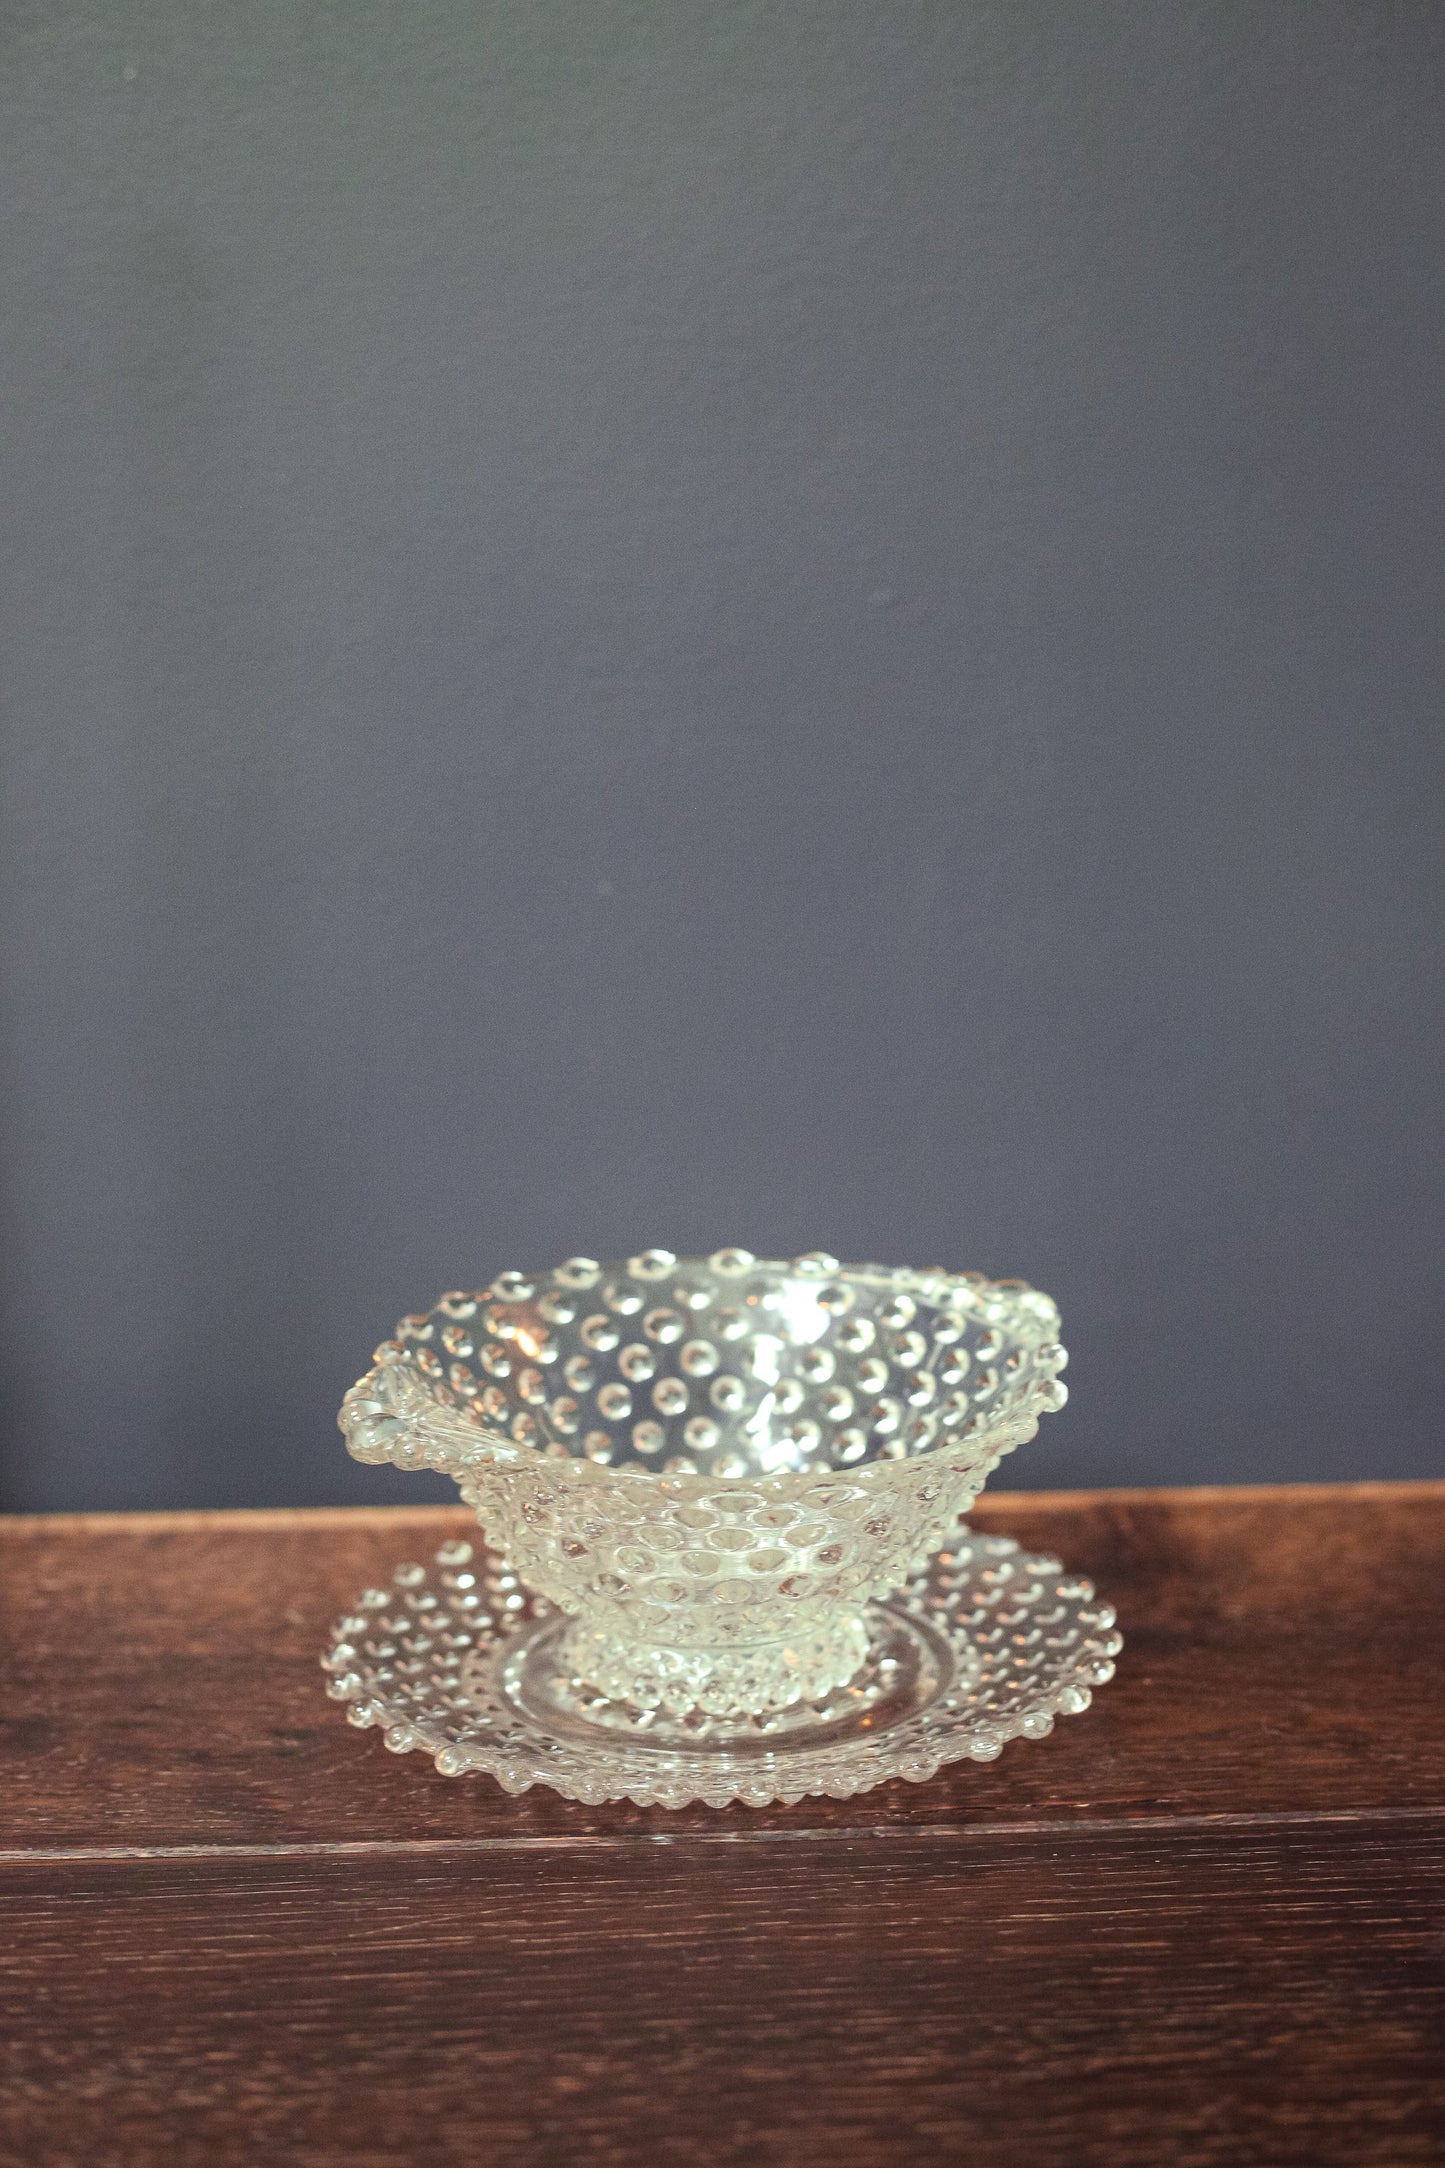 Clear Hobnail Bowl with Handles and Matching Glass Dish - Dot Depression Glass Candy Dish & Saucer